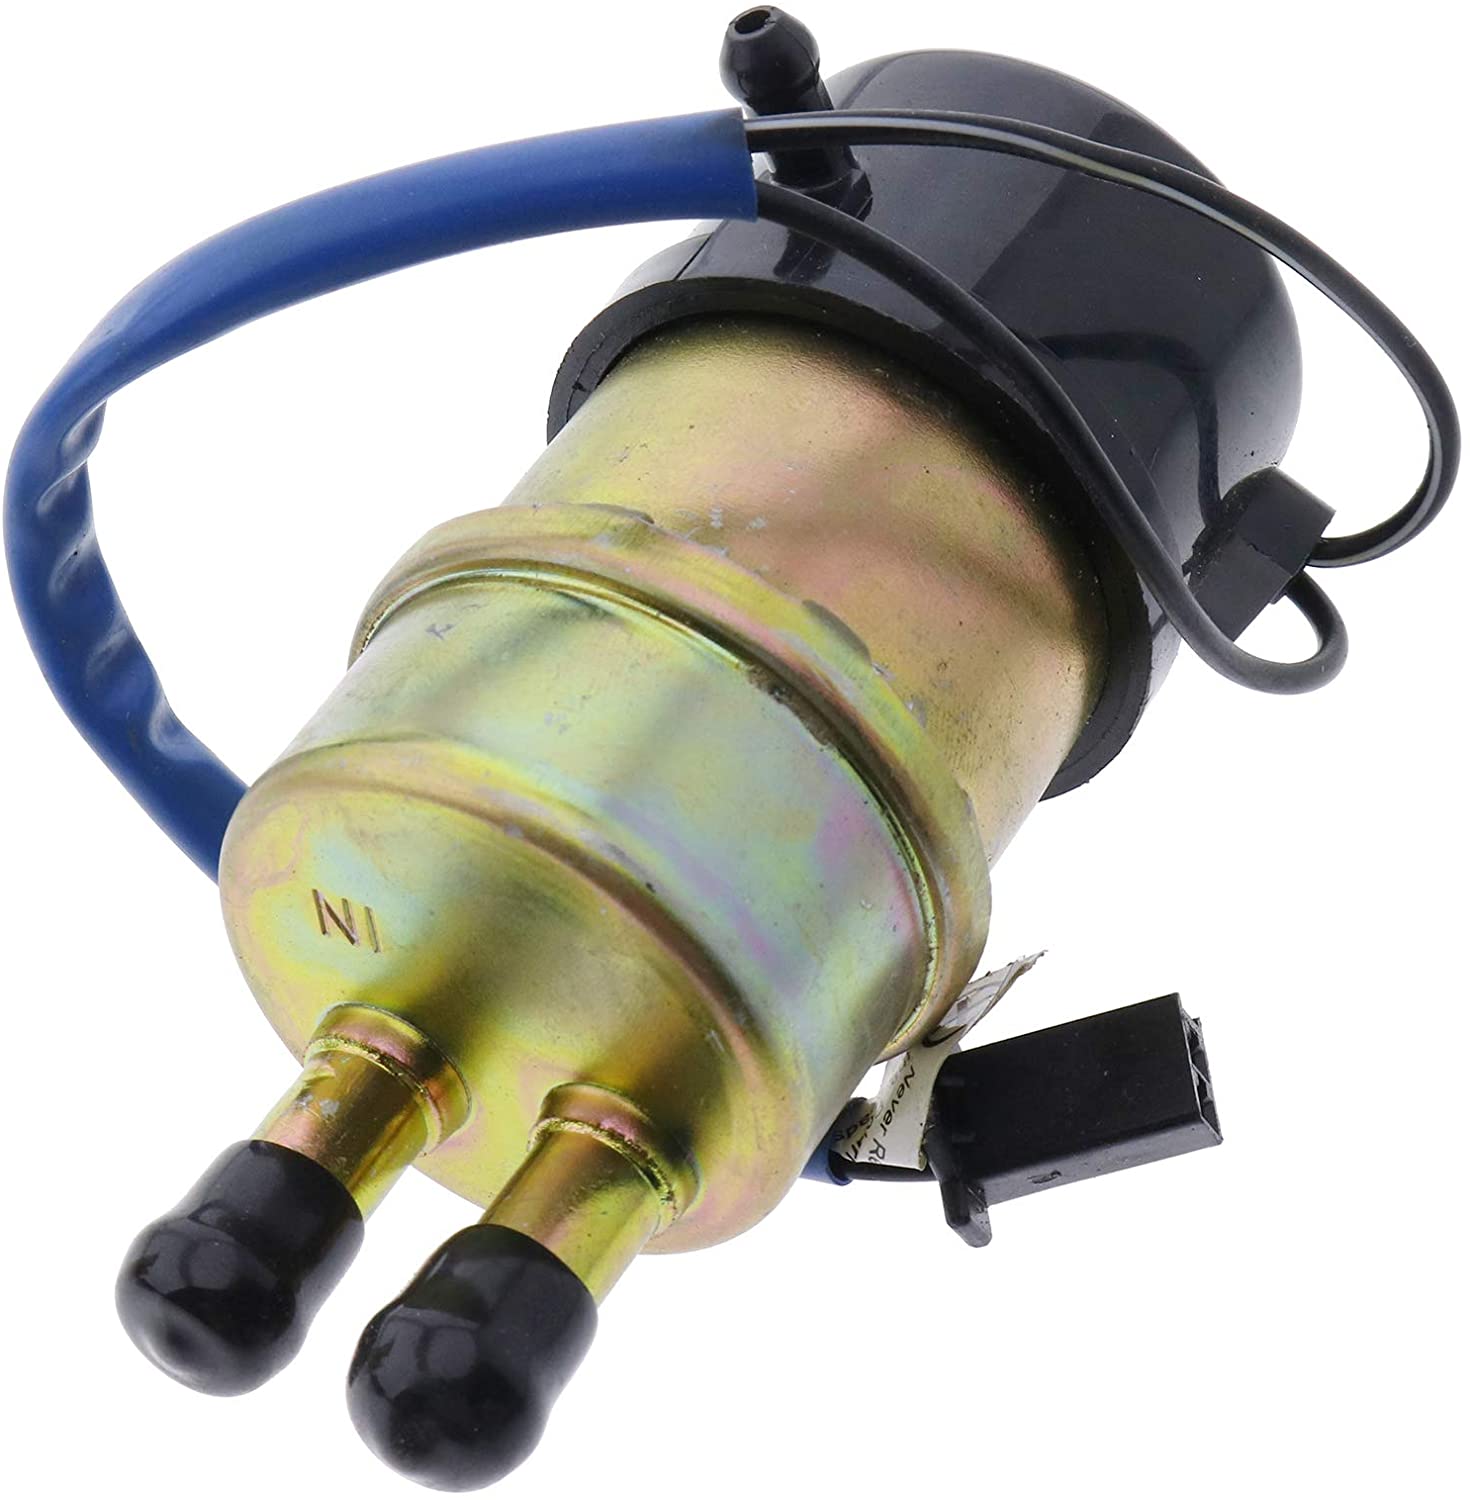 Electric Fuel Pump Assy 16710-MBA-612 16710-MBA-611 Compatible with Honda VT750C VT750CD VT750DC Shadow ACE 750 1998-2003(10mm) - KUDUPARTS